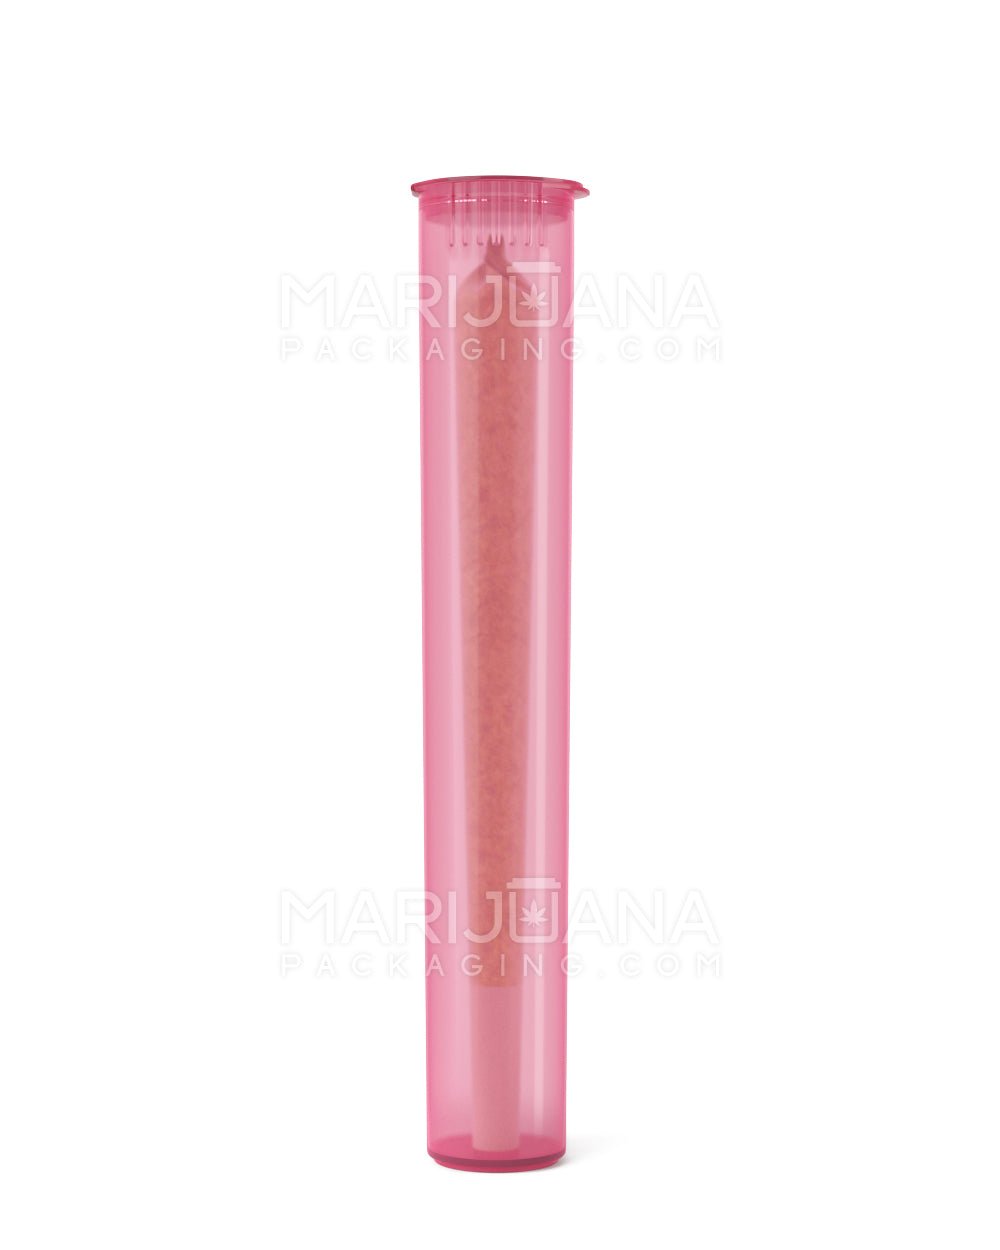 Child Resistant | King Size Pop Top Translucent Plastic Pre-Roll Tubes | 116mm - Pink- 1000 Count - 8